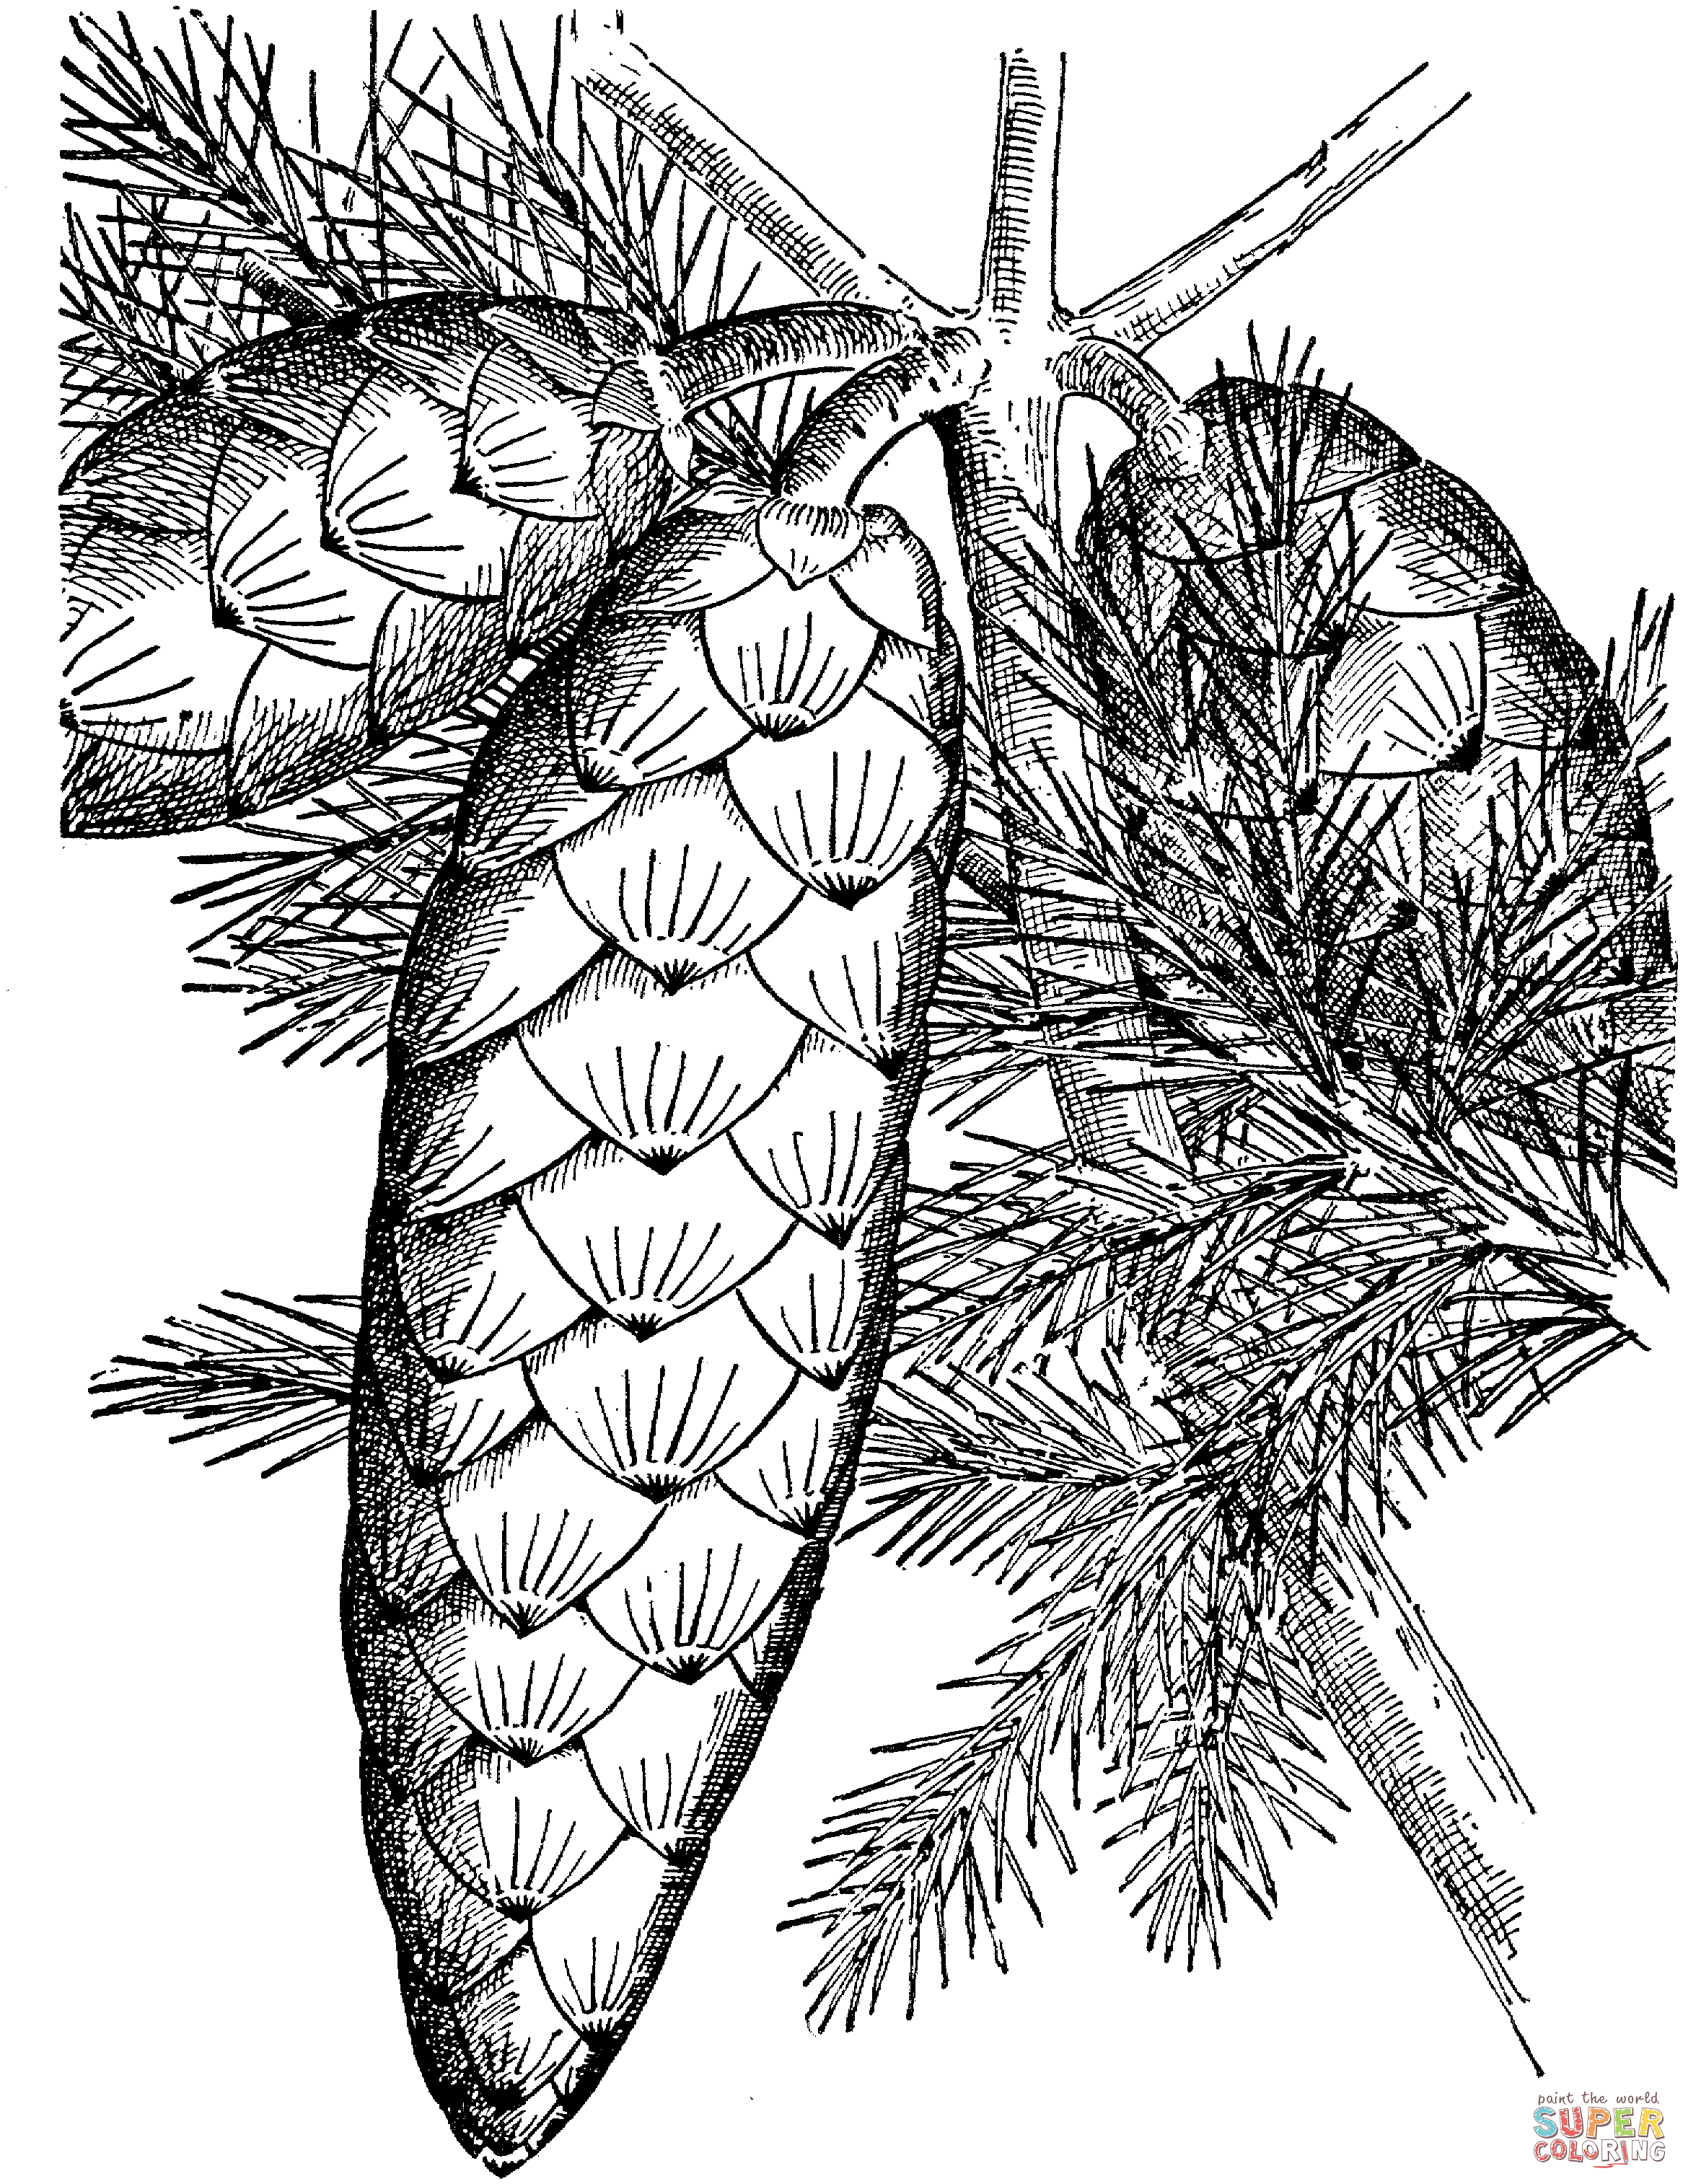 Norway spruce cone coloring page free printable coloring pages